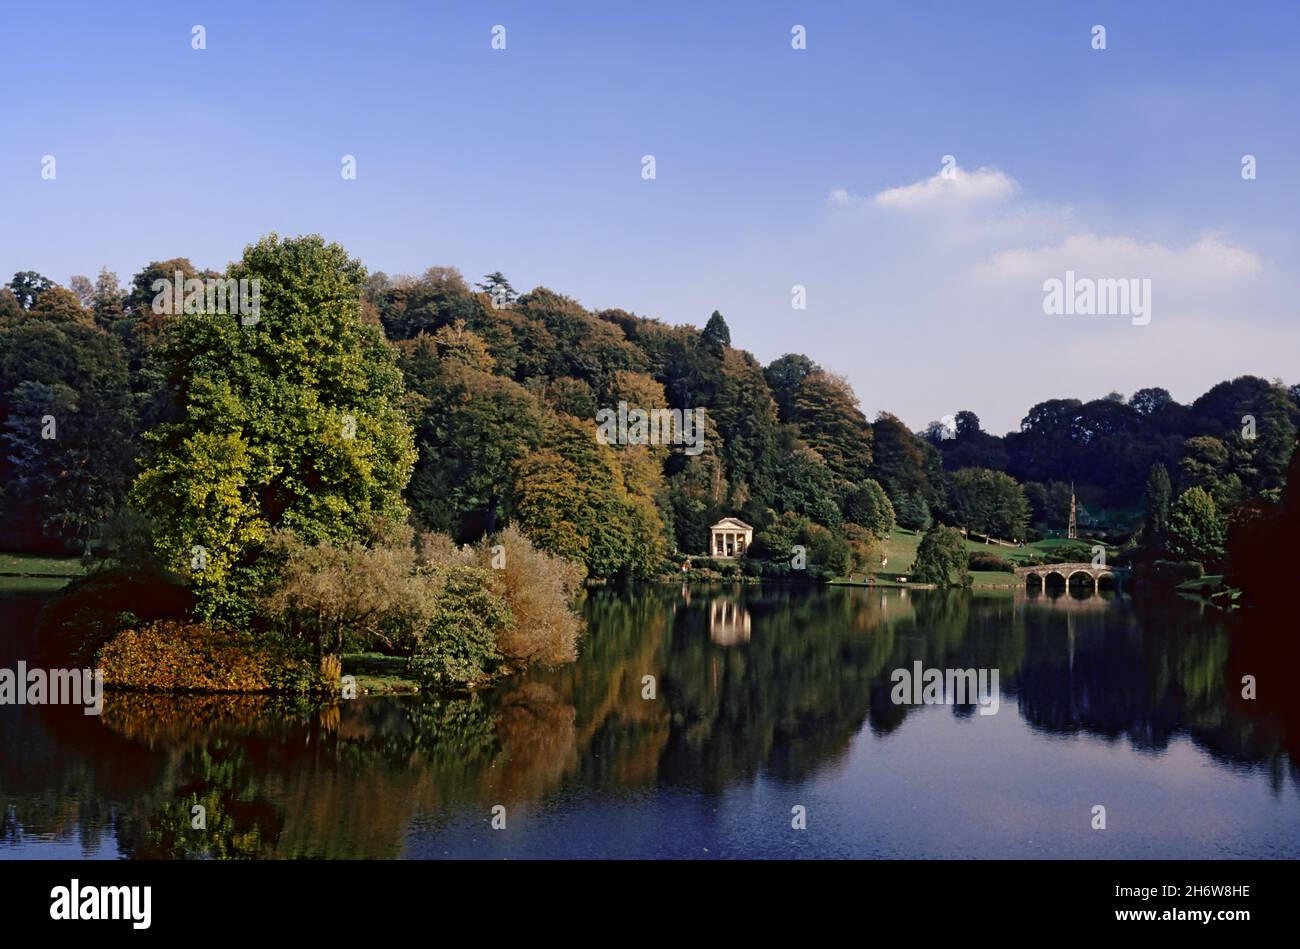 Stourhead Garden, Wiltshire, England, UK, showing the lake, C18th Palladian bridge, the Temple of Flora and the Bristol Cross.  Transparency film photograph from 1992. Stock Photo